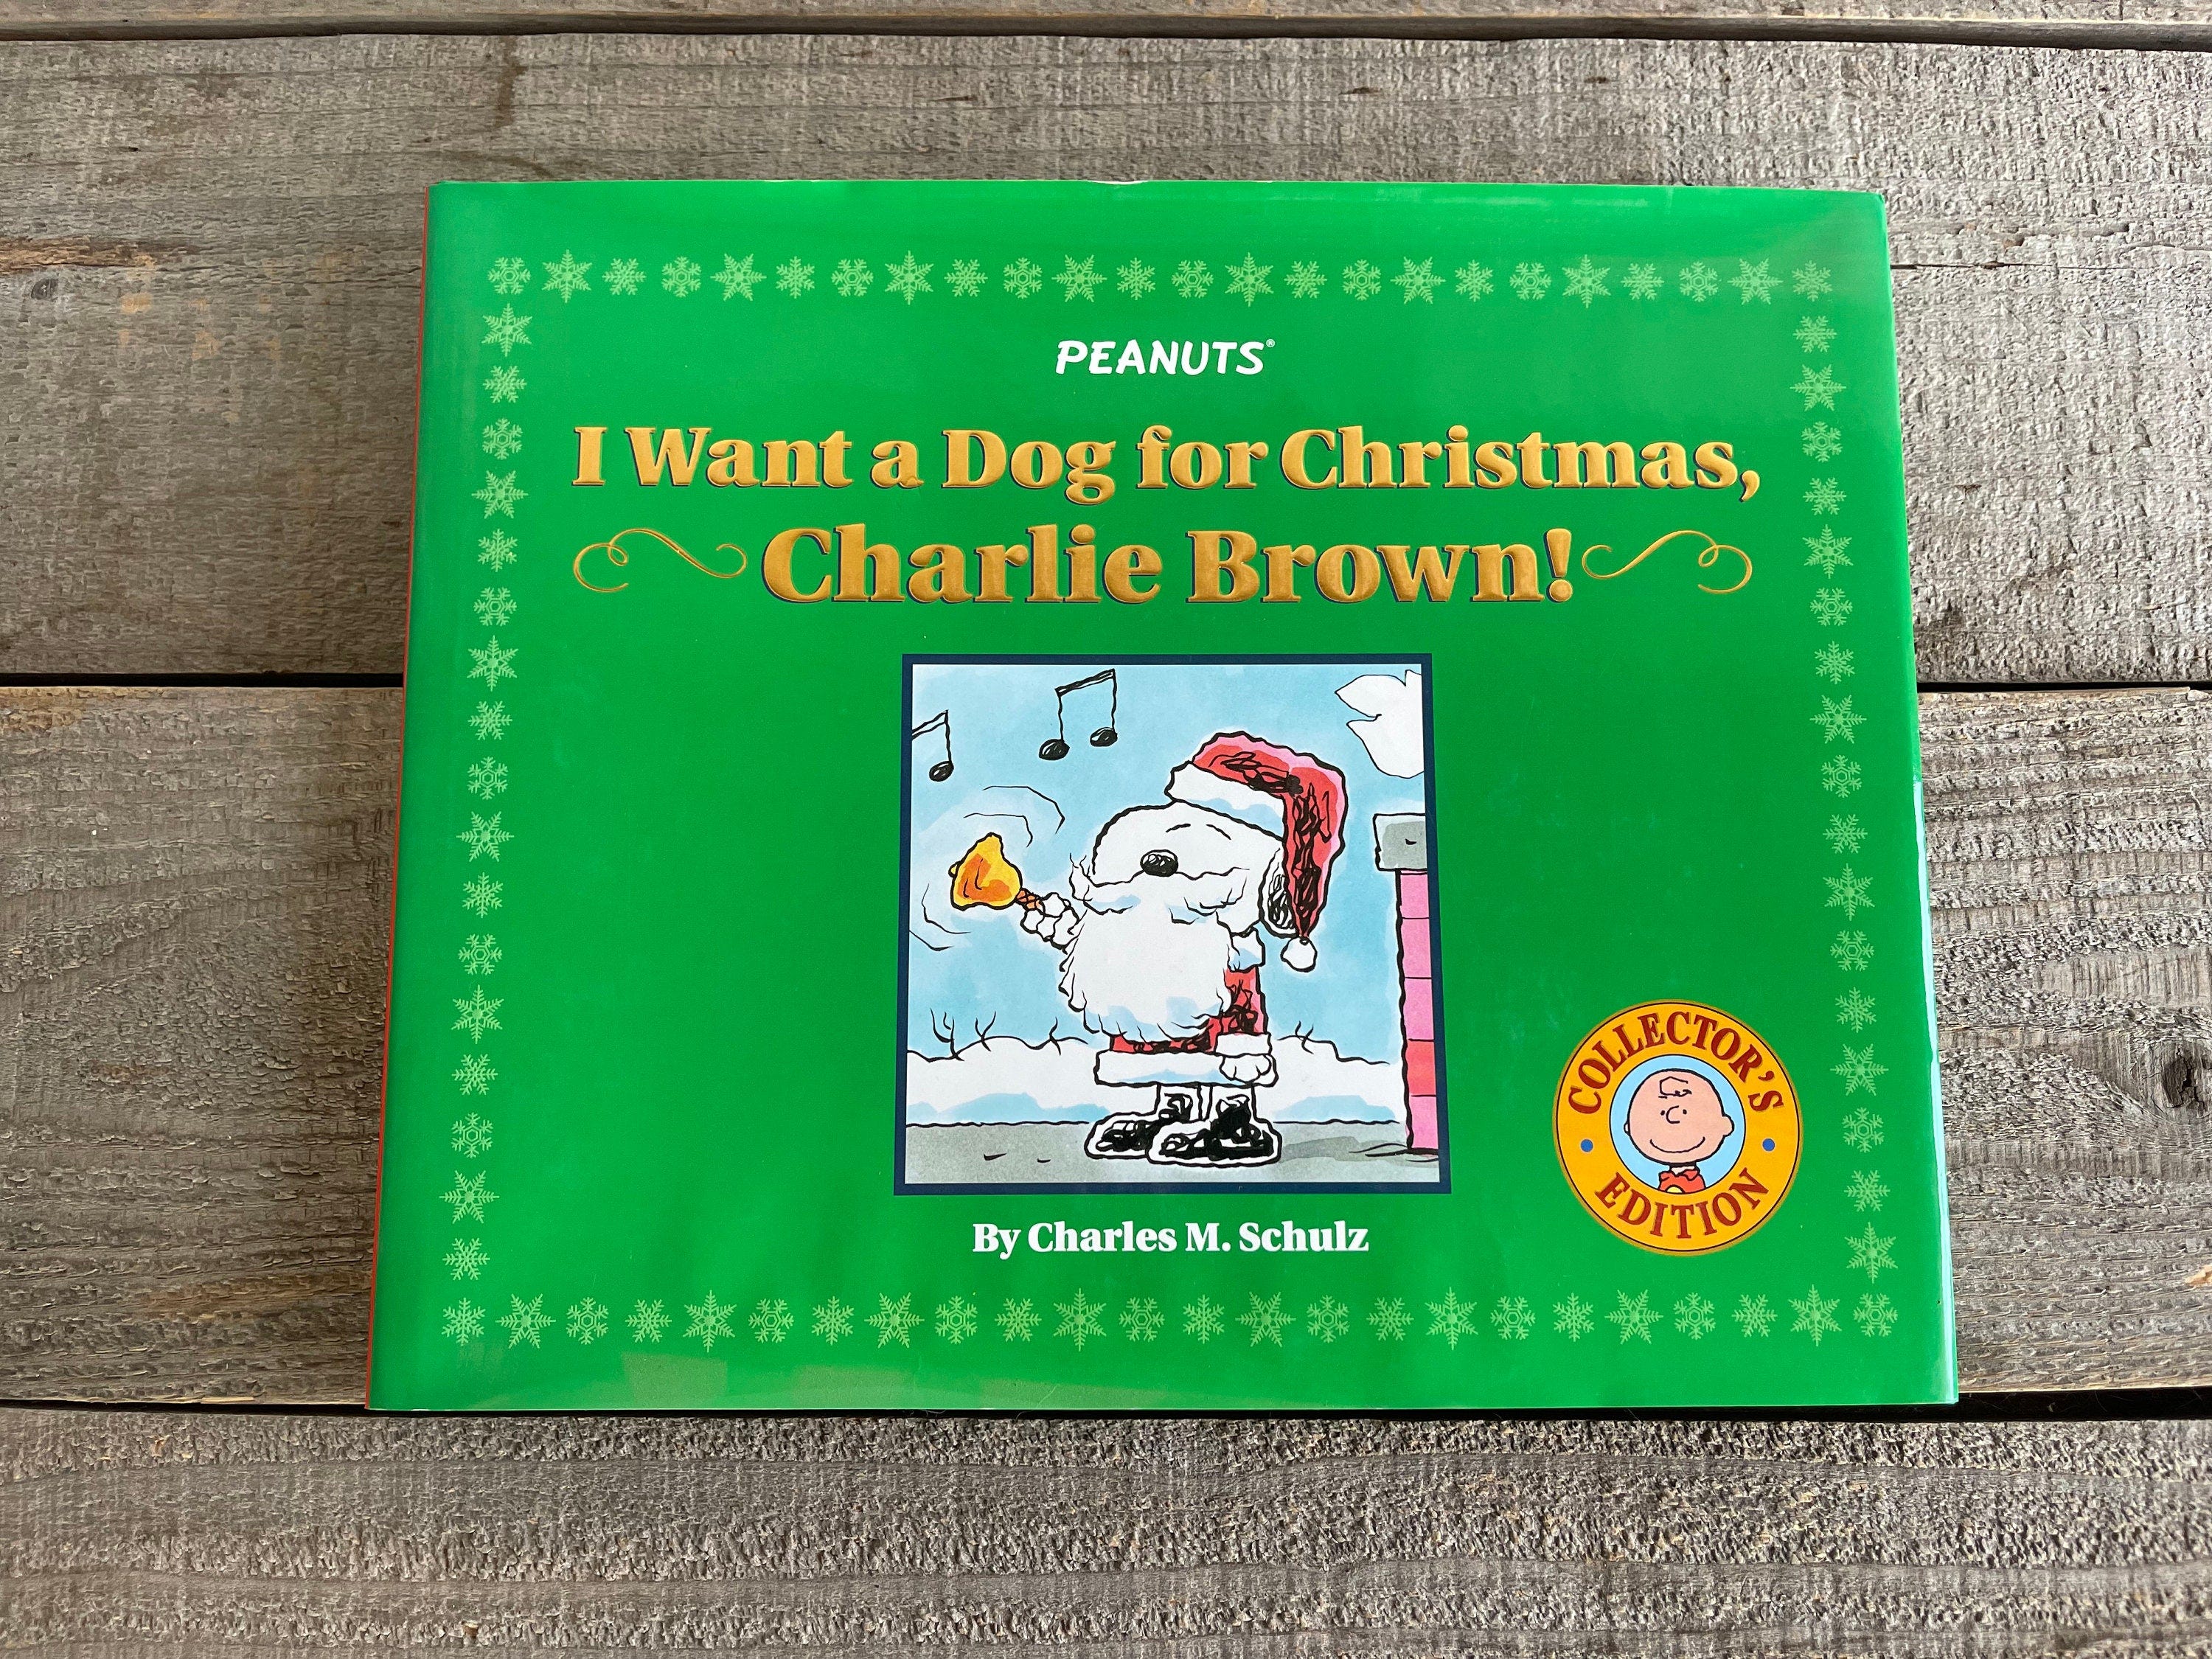 I Want A Dog for Christmas, Charlie Brown! // Peanuts Book by Charles M. Schulz // Collector